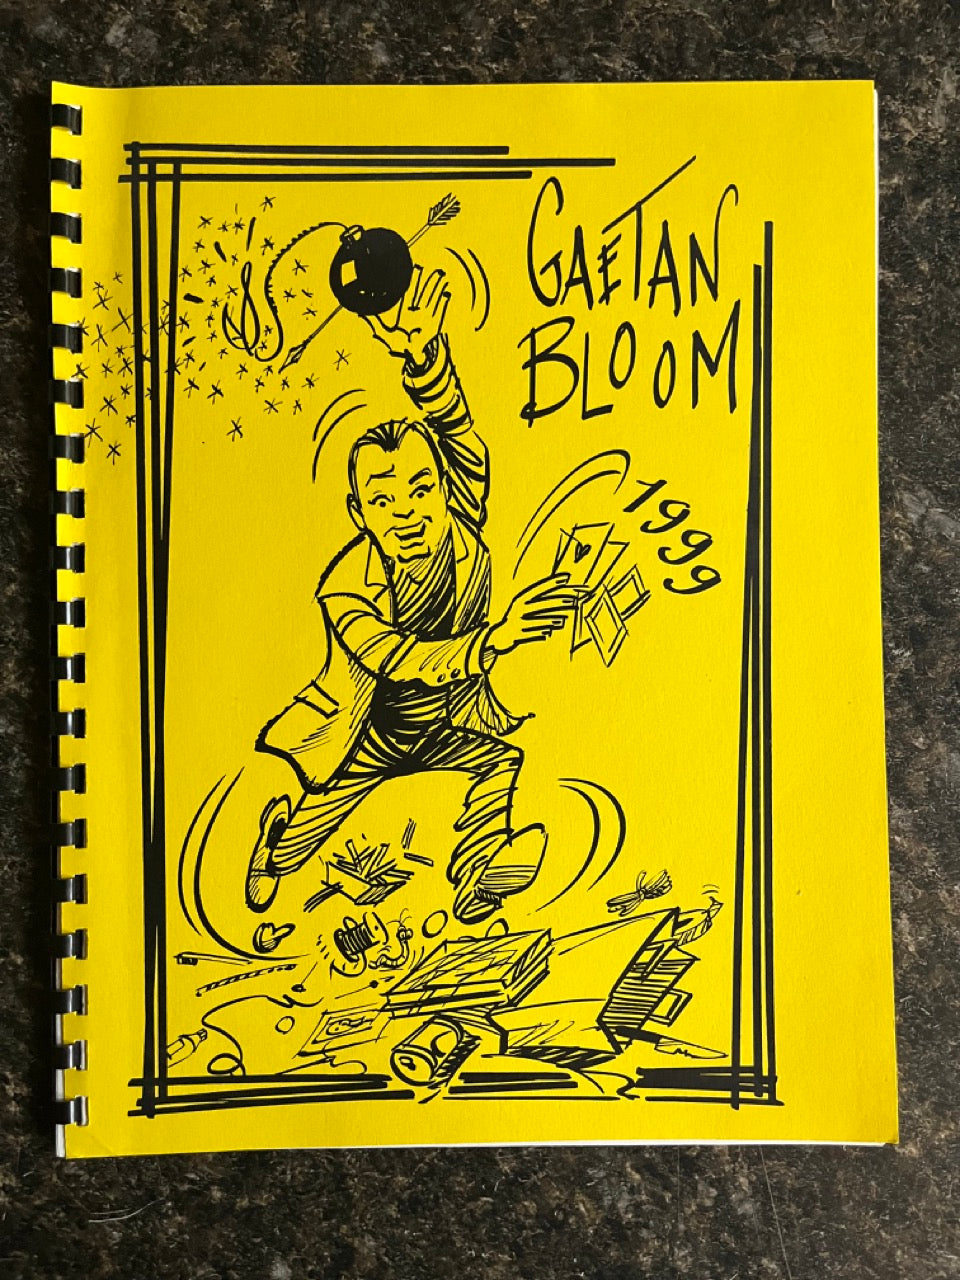 Gaetan Bloom Set of 4 Lecture Notes